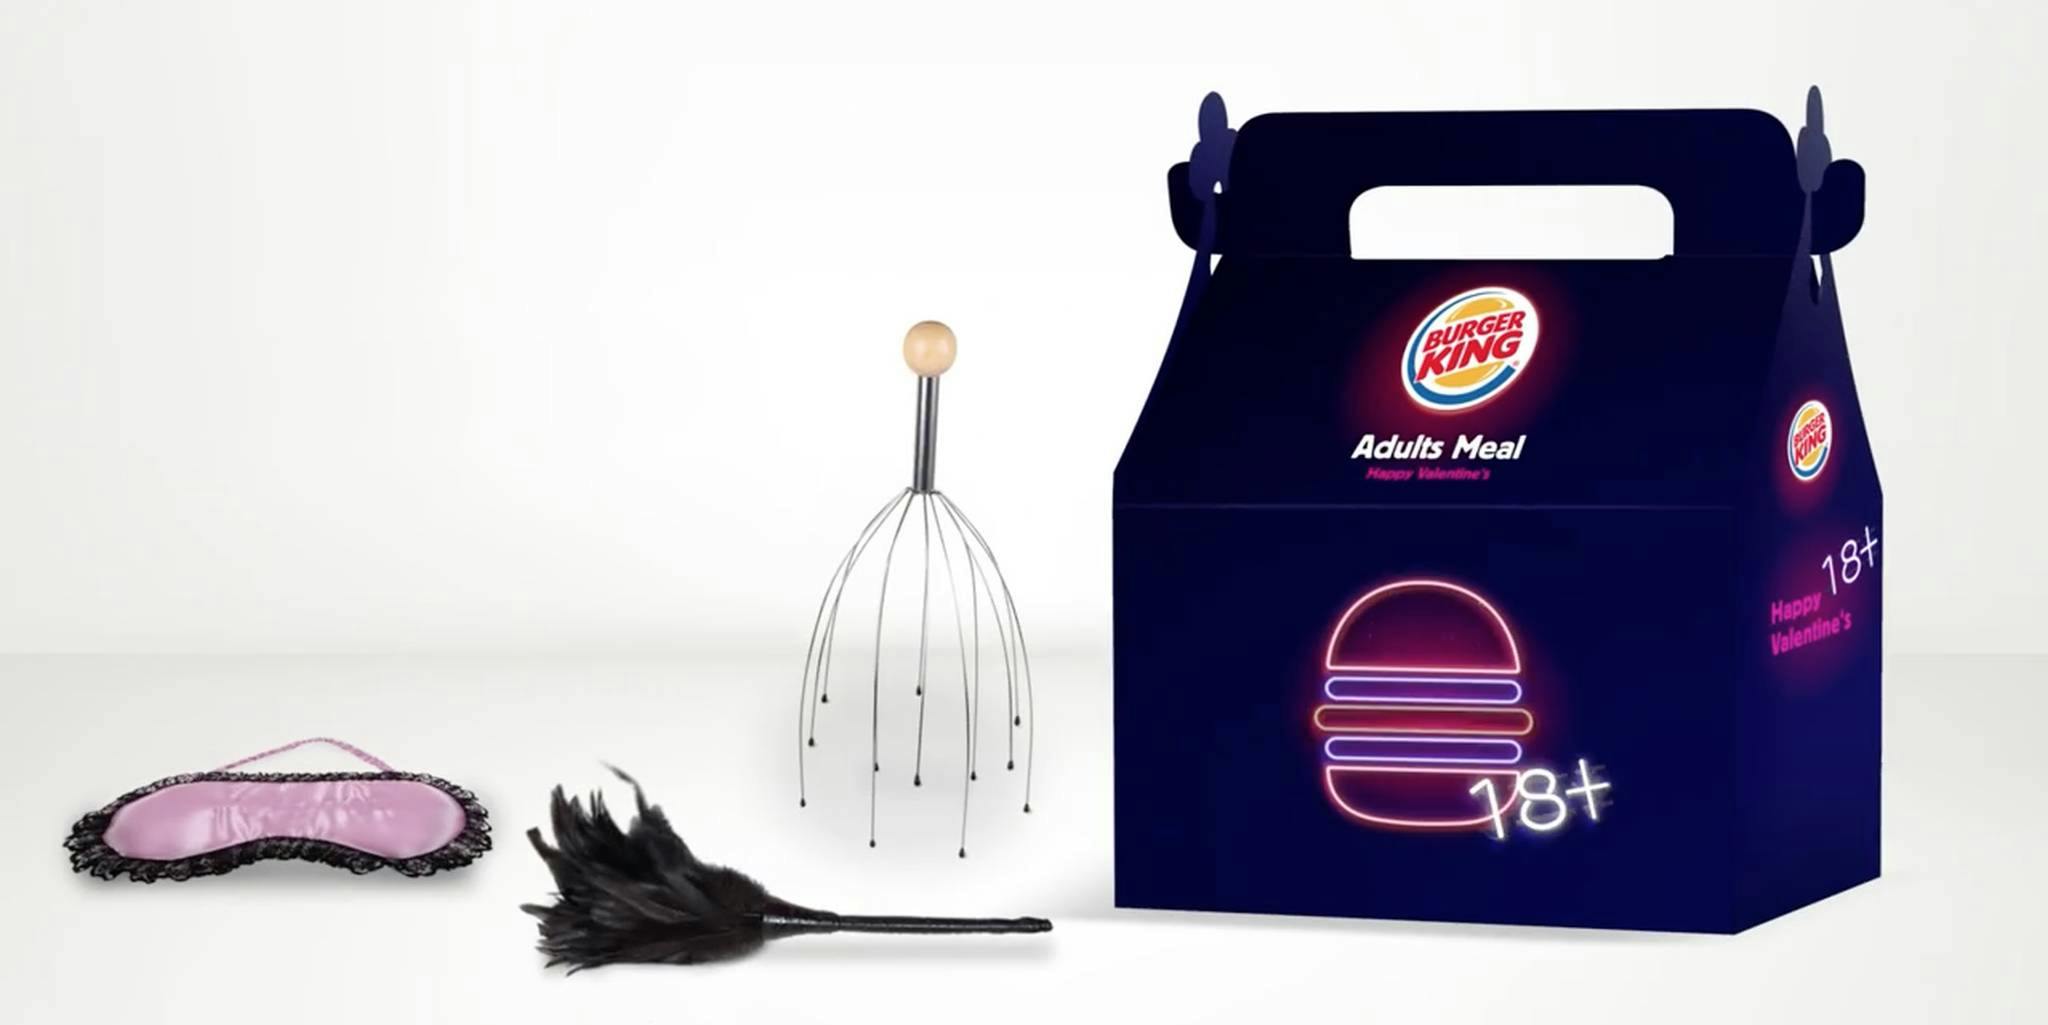 Burger King Spices Up Valentines Day With Sexy Toy And Adult Meal